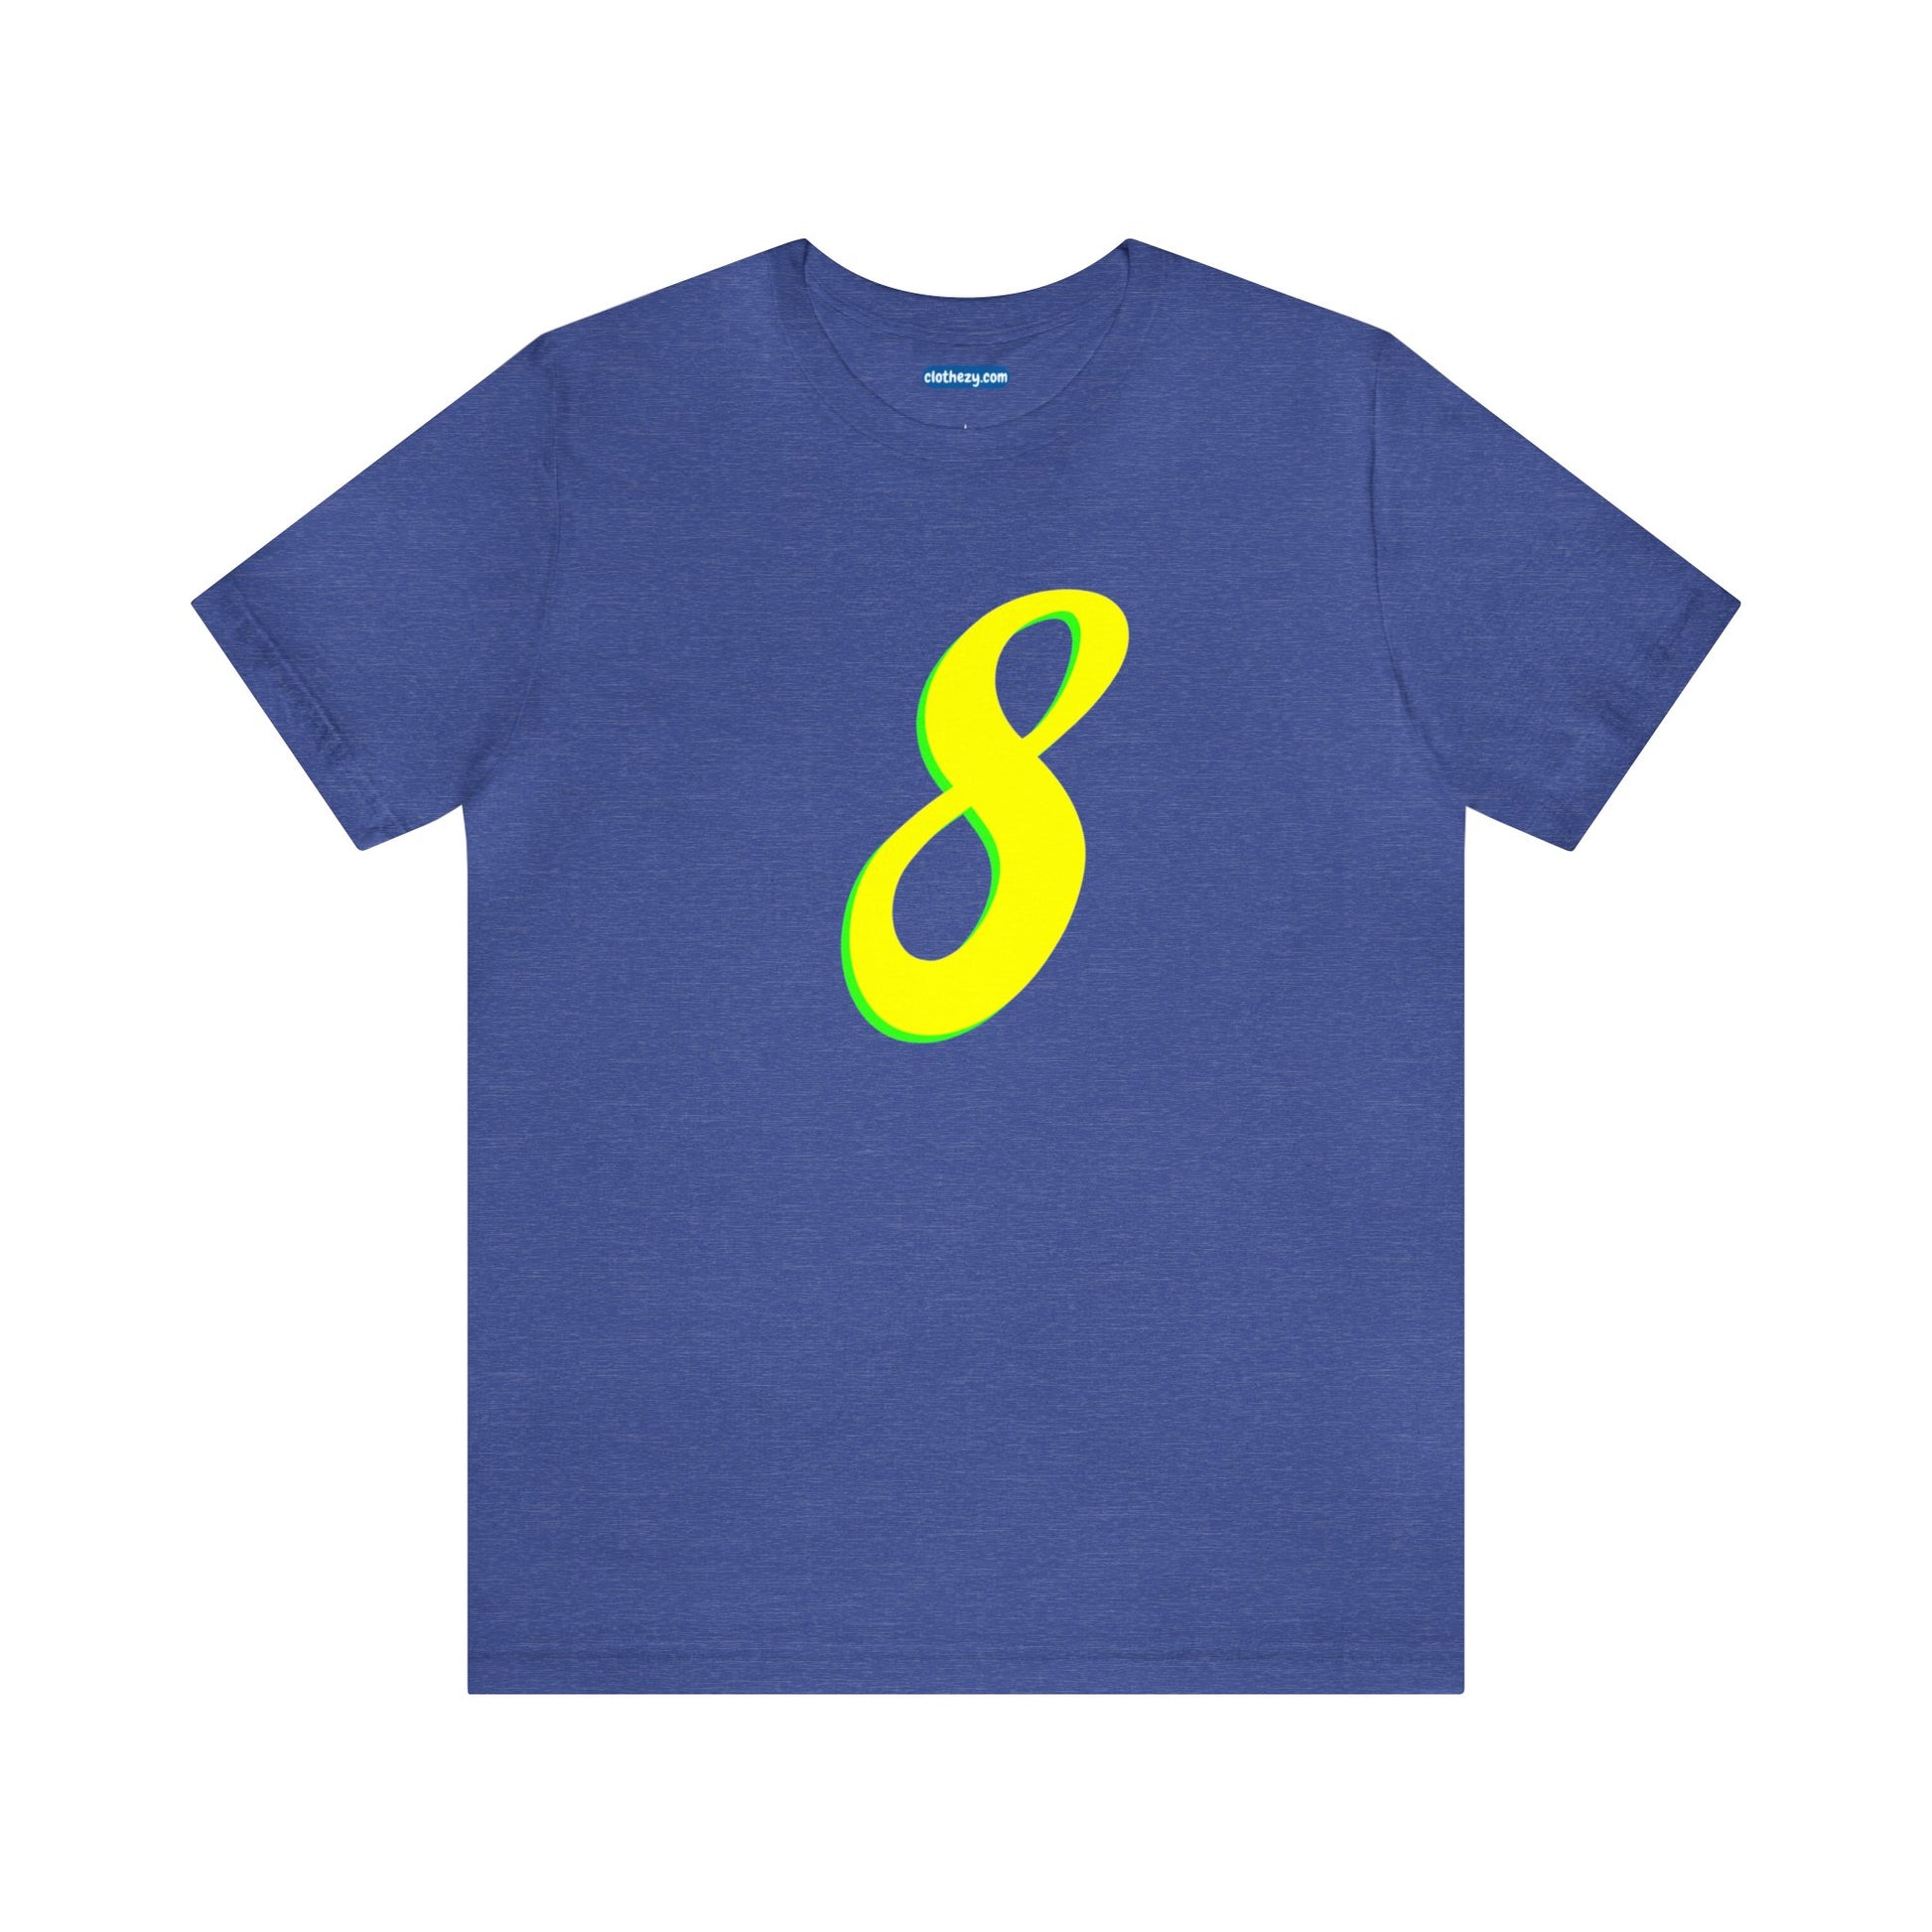 Number 8 Design - Soft Cotton Tee for birthdays and celebrations, Gift for friends and family, Multiple Options by clothezy.com in Navy Size Small - Buy Now